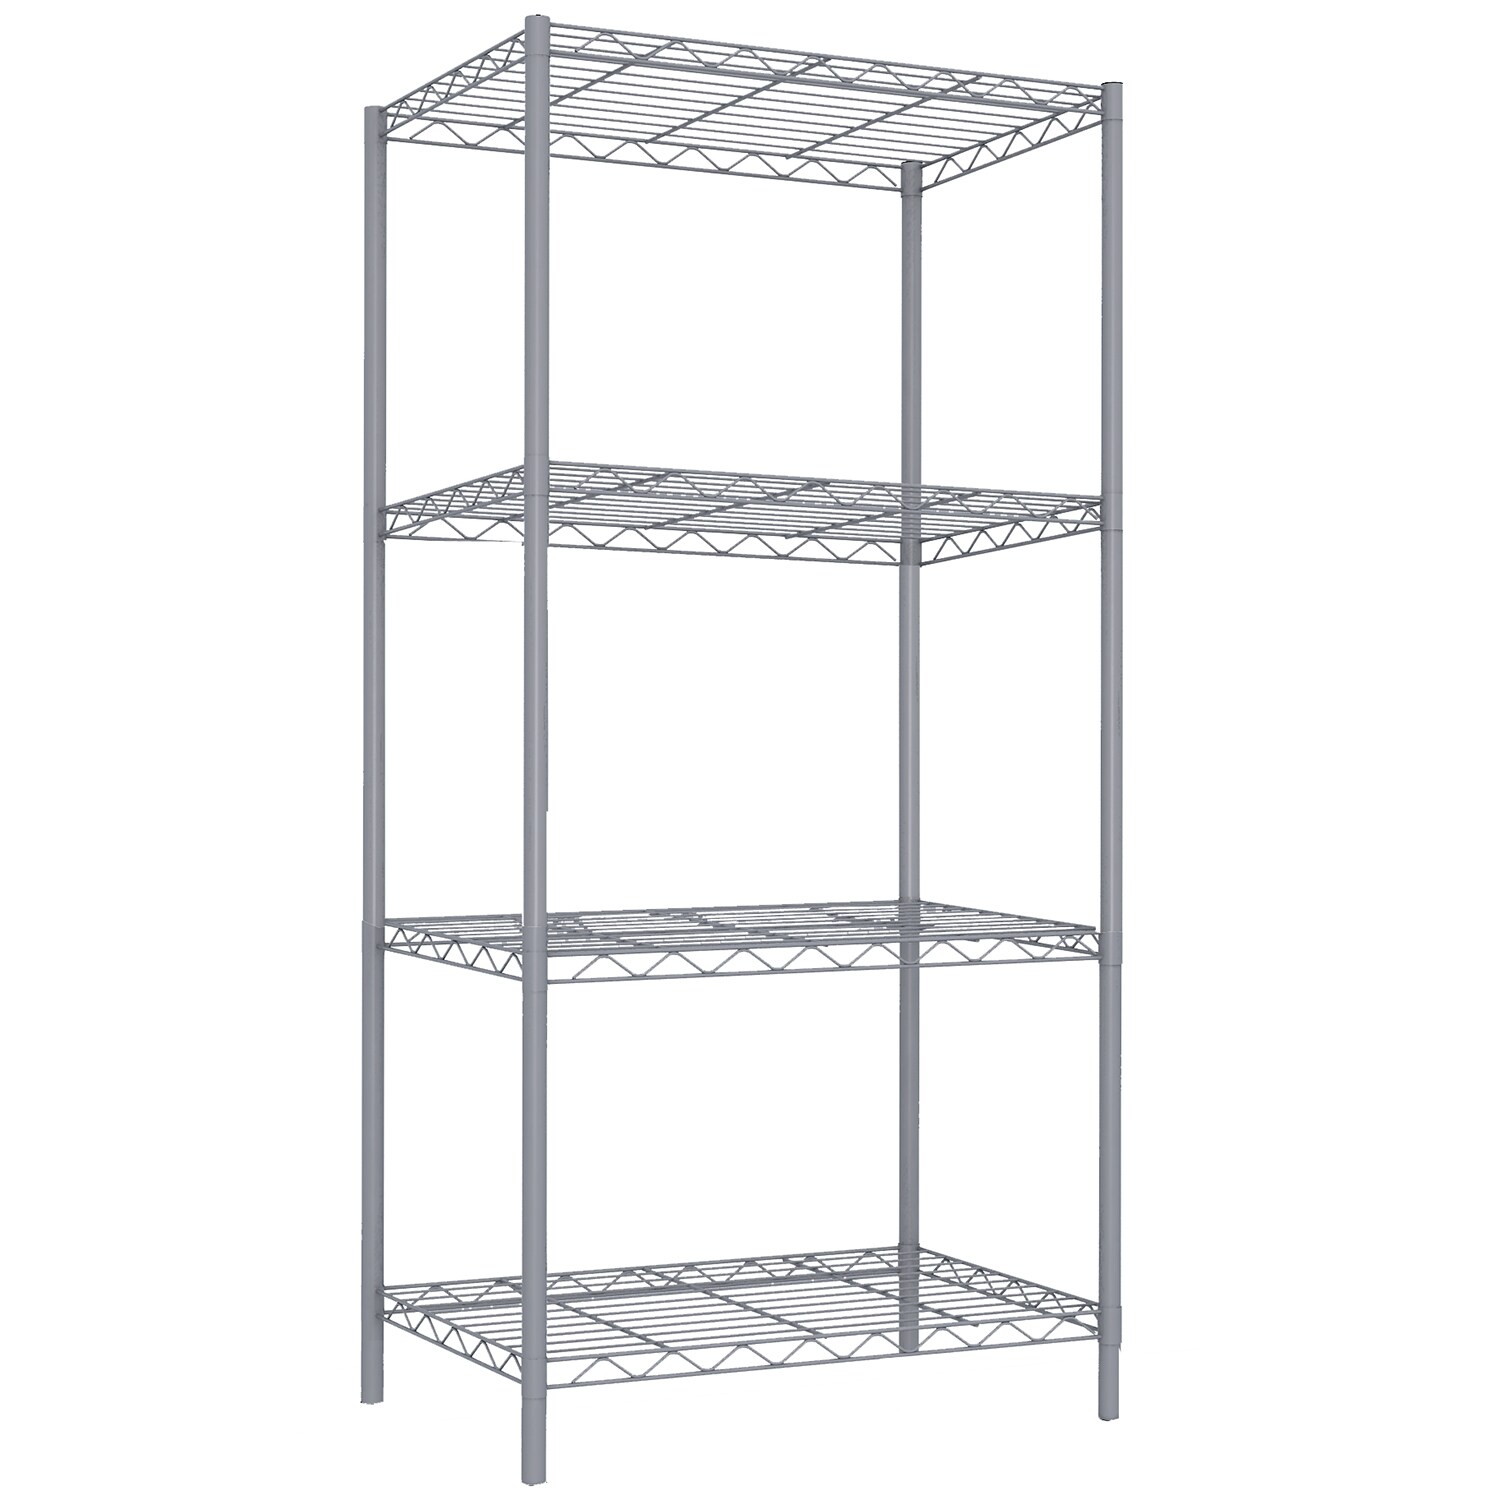 Home Basics 2 Tier Multi-Compartment Aluminum Shower Caddy with